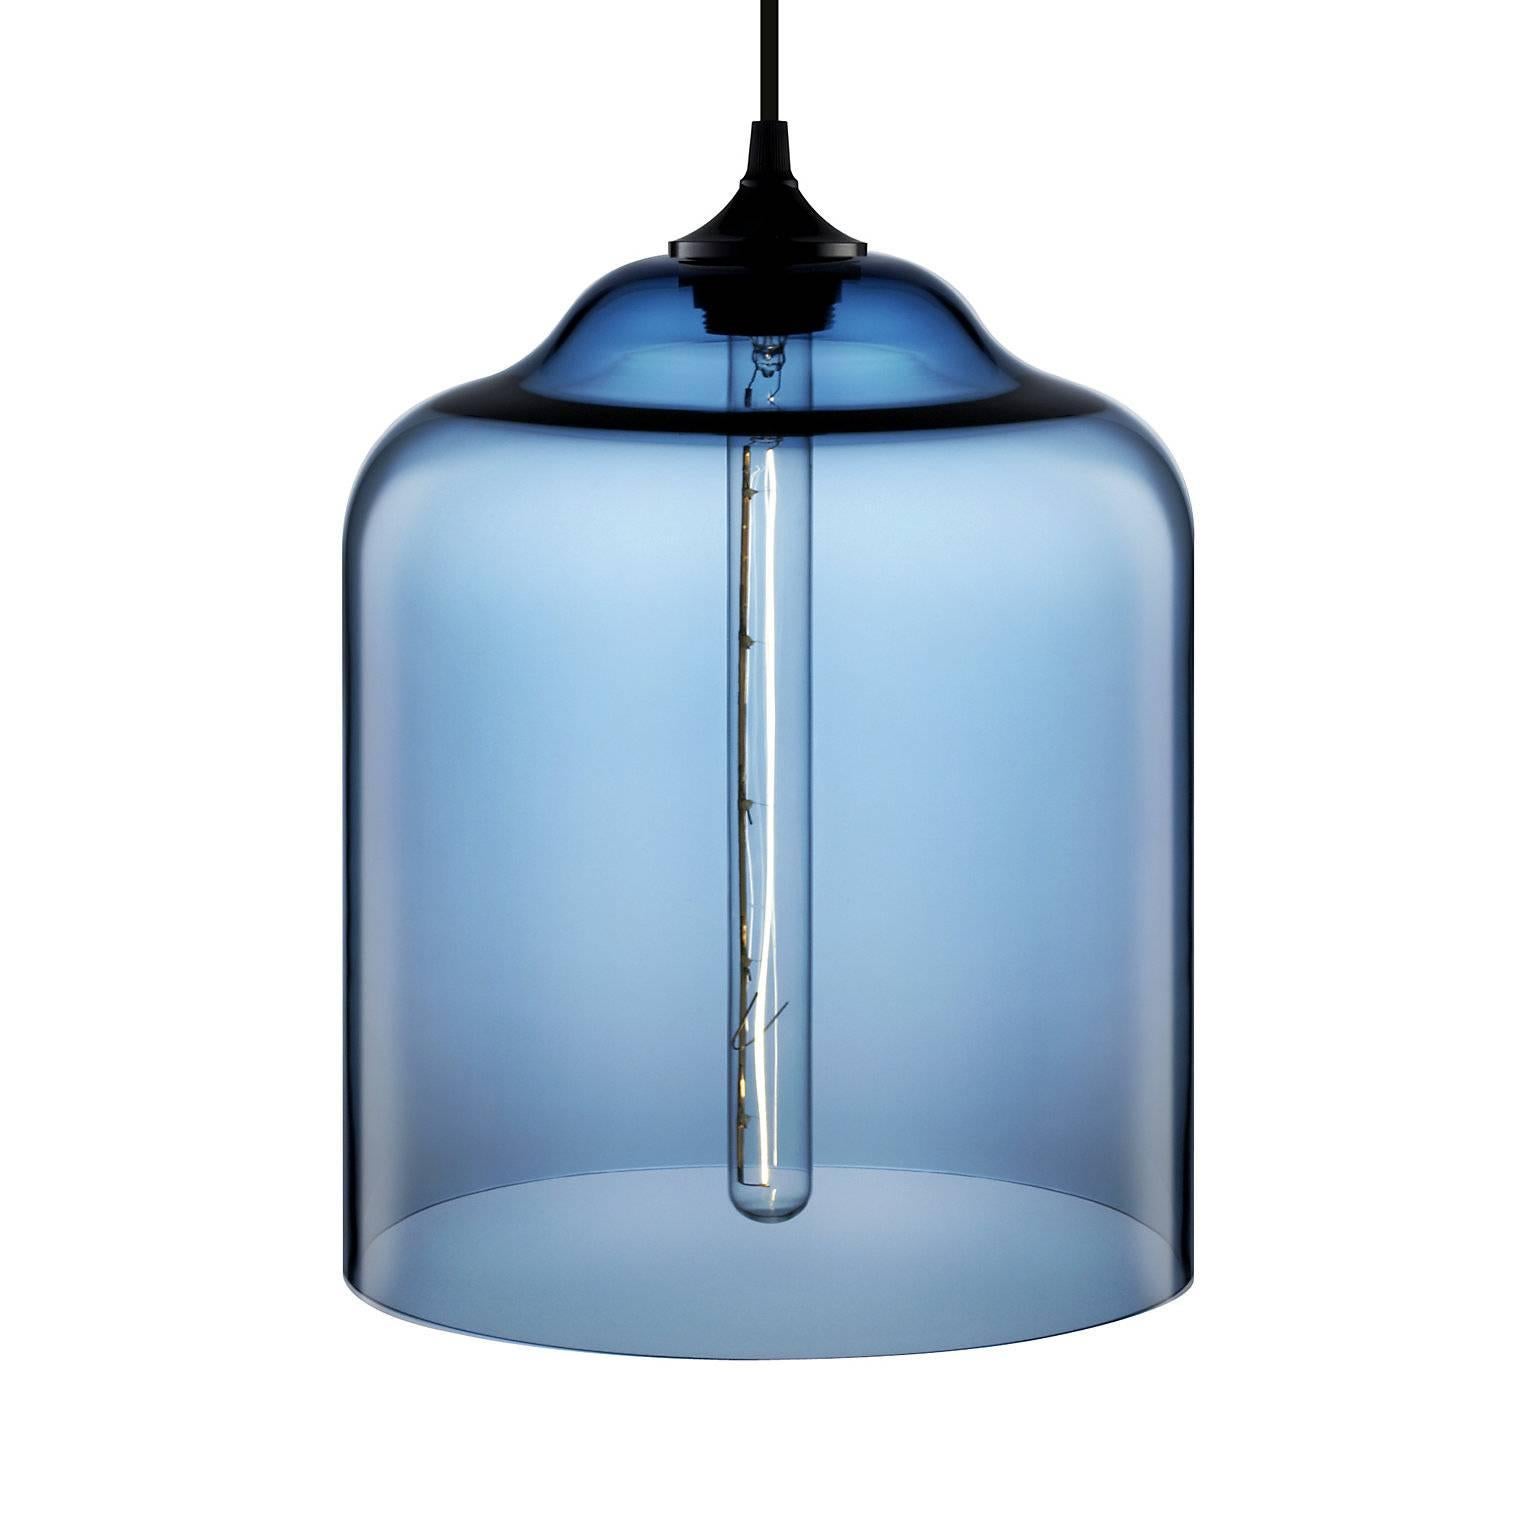 Bell Jar Gray Handblown Modern Glass Pendant Light, Made in the USA In New Condition For Sale In Beacon, NY